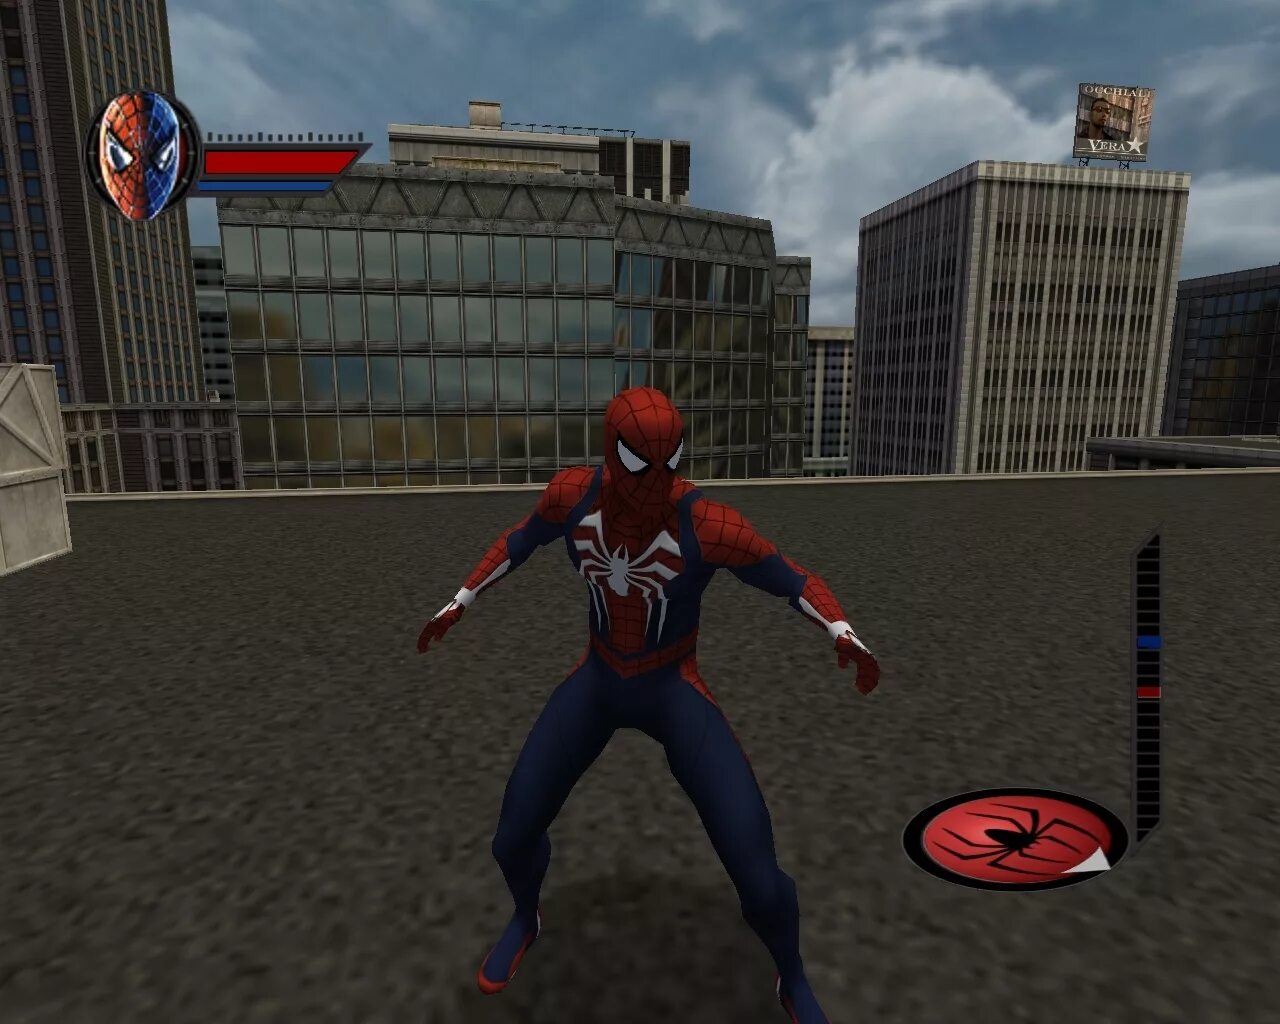 Ultimate Spider-man ps2. Spider-man (игра, 2000). Человек паук 2002 игра. Spider man 1 игра.